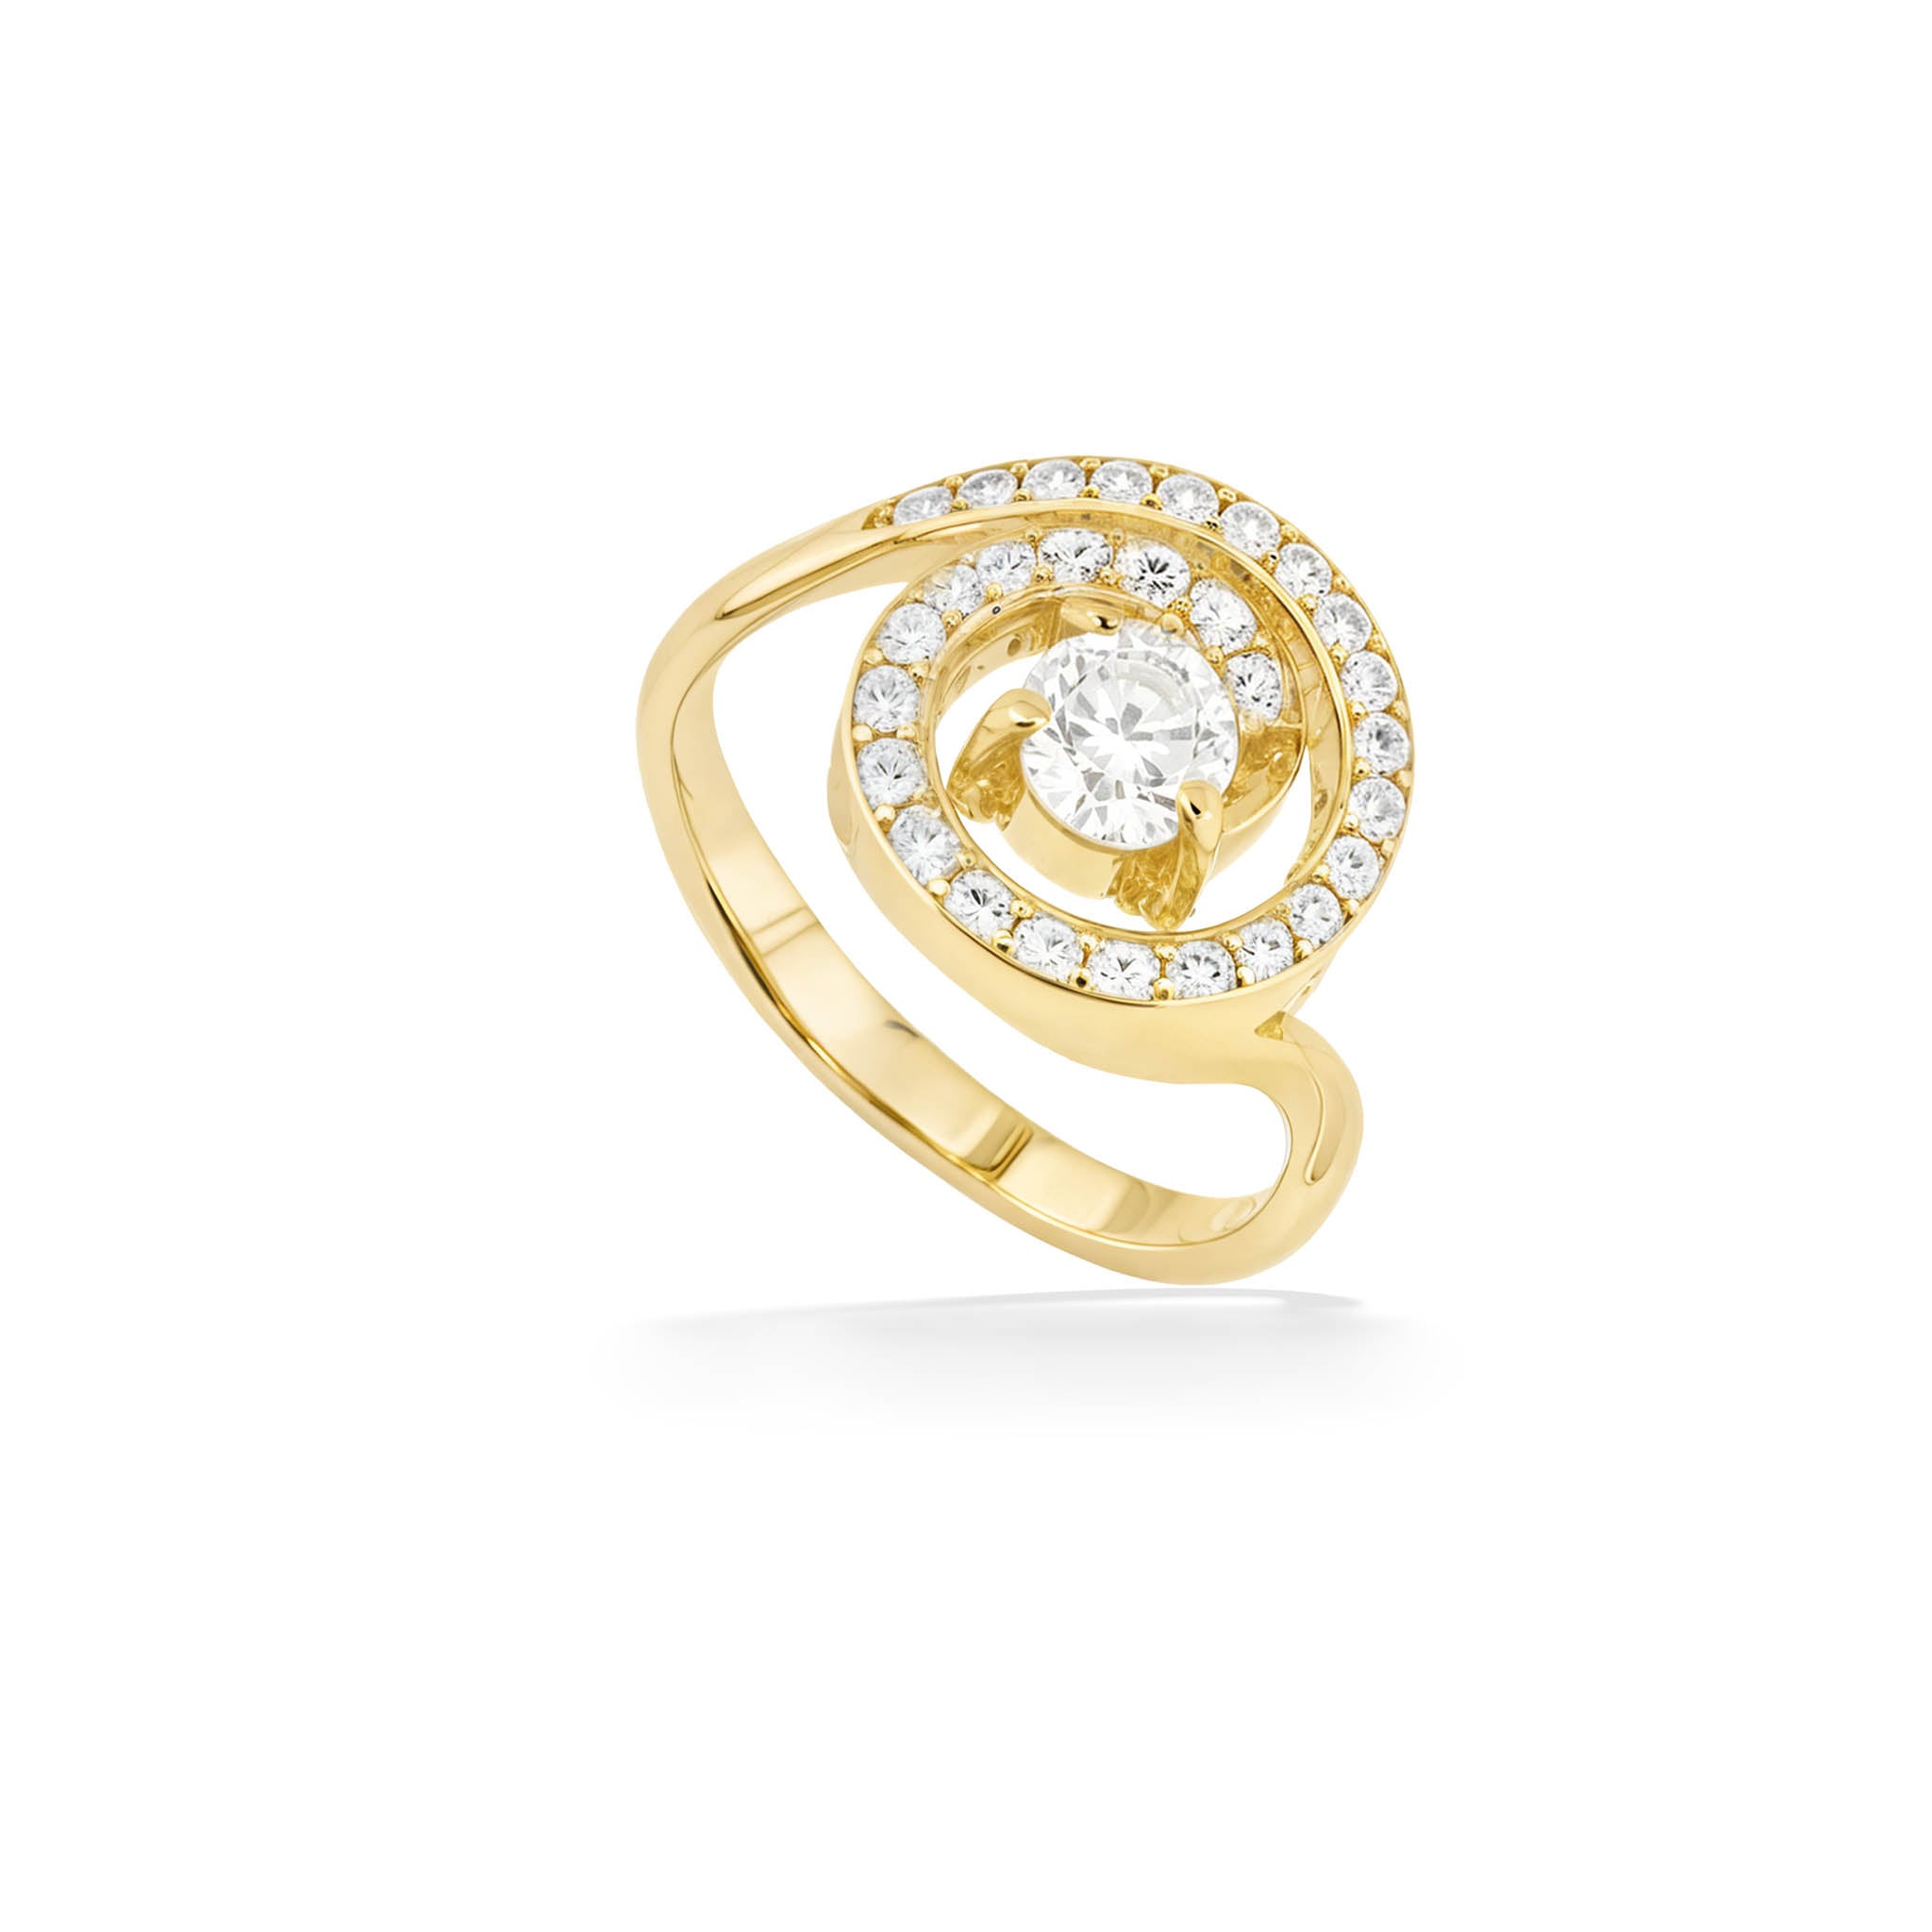 Buy quality 22kt Filigree Yellow Gold Ring in Pune